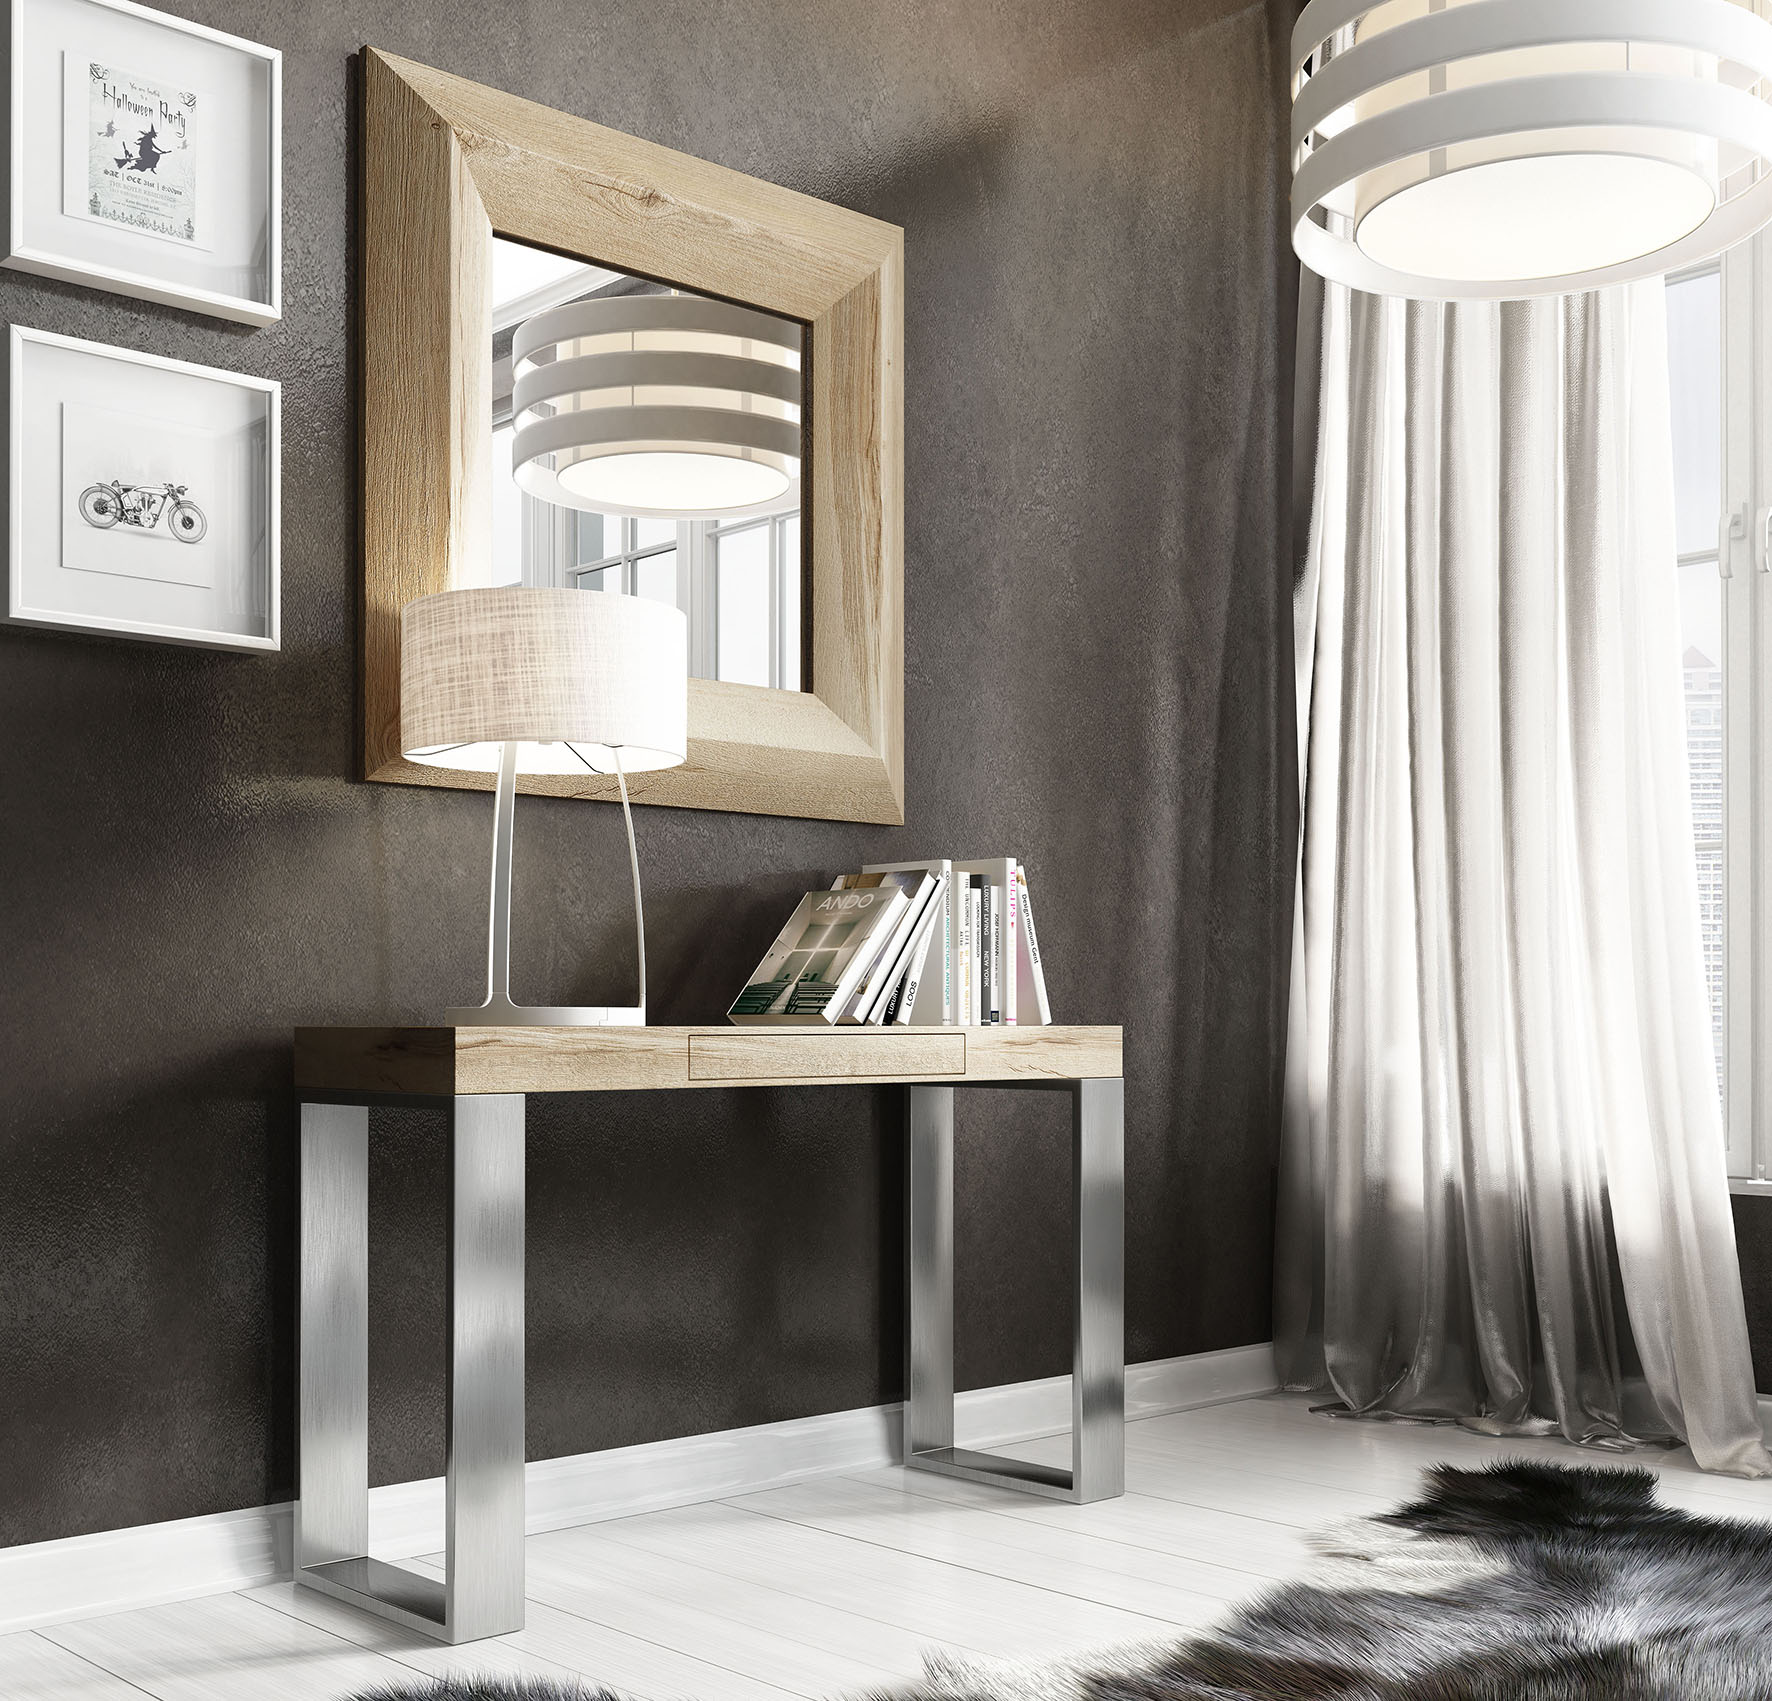 Brands Franco ENZO Dining and Wall Units, Spain CII.39 Console Table